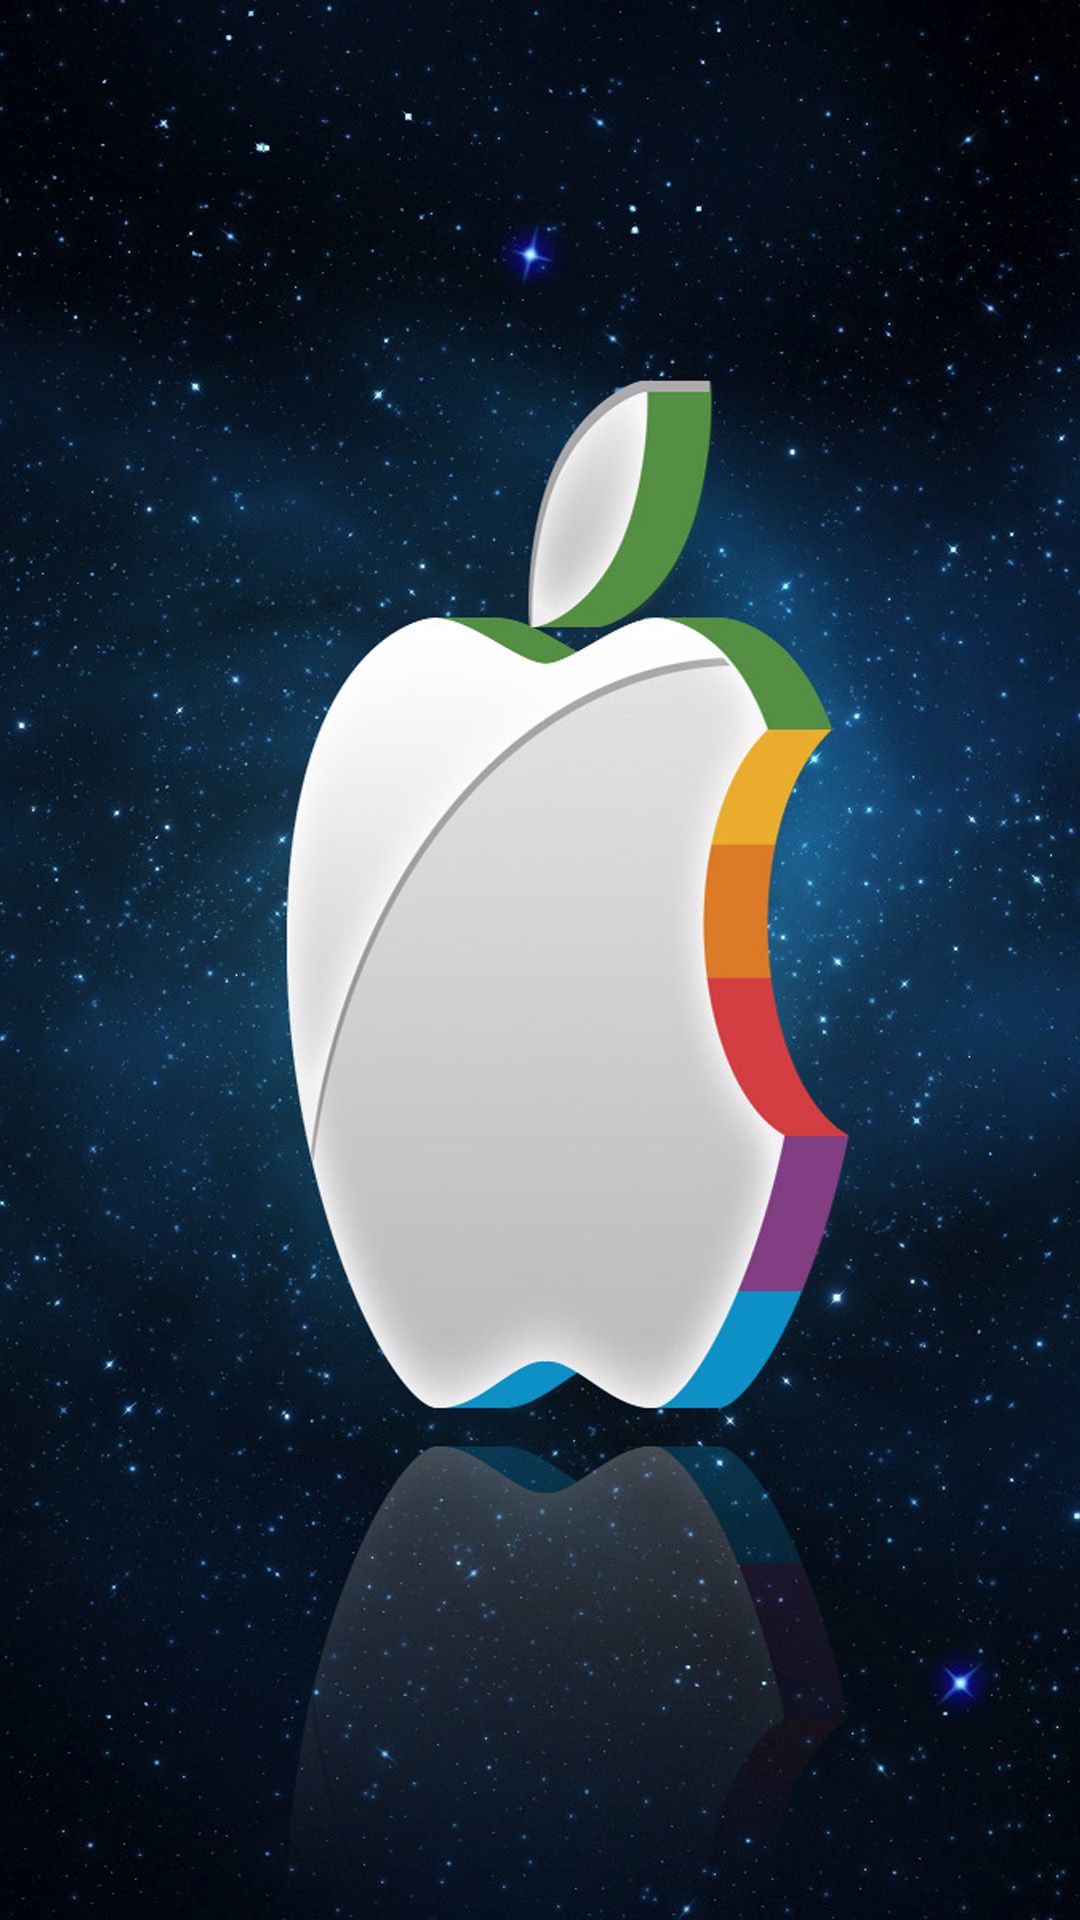 3D Apple Logo In Space Wallpaper and Background for iPhone